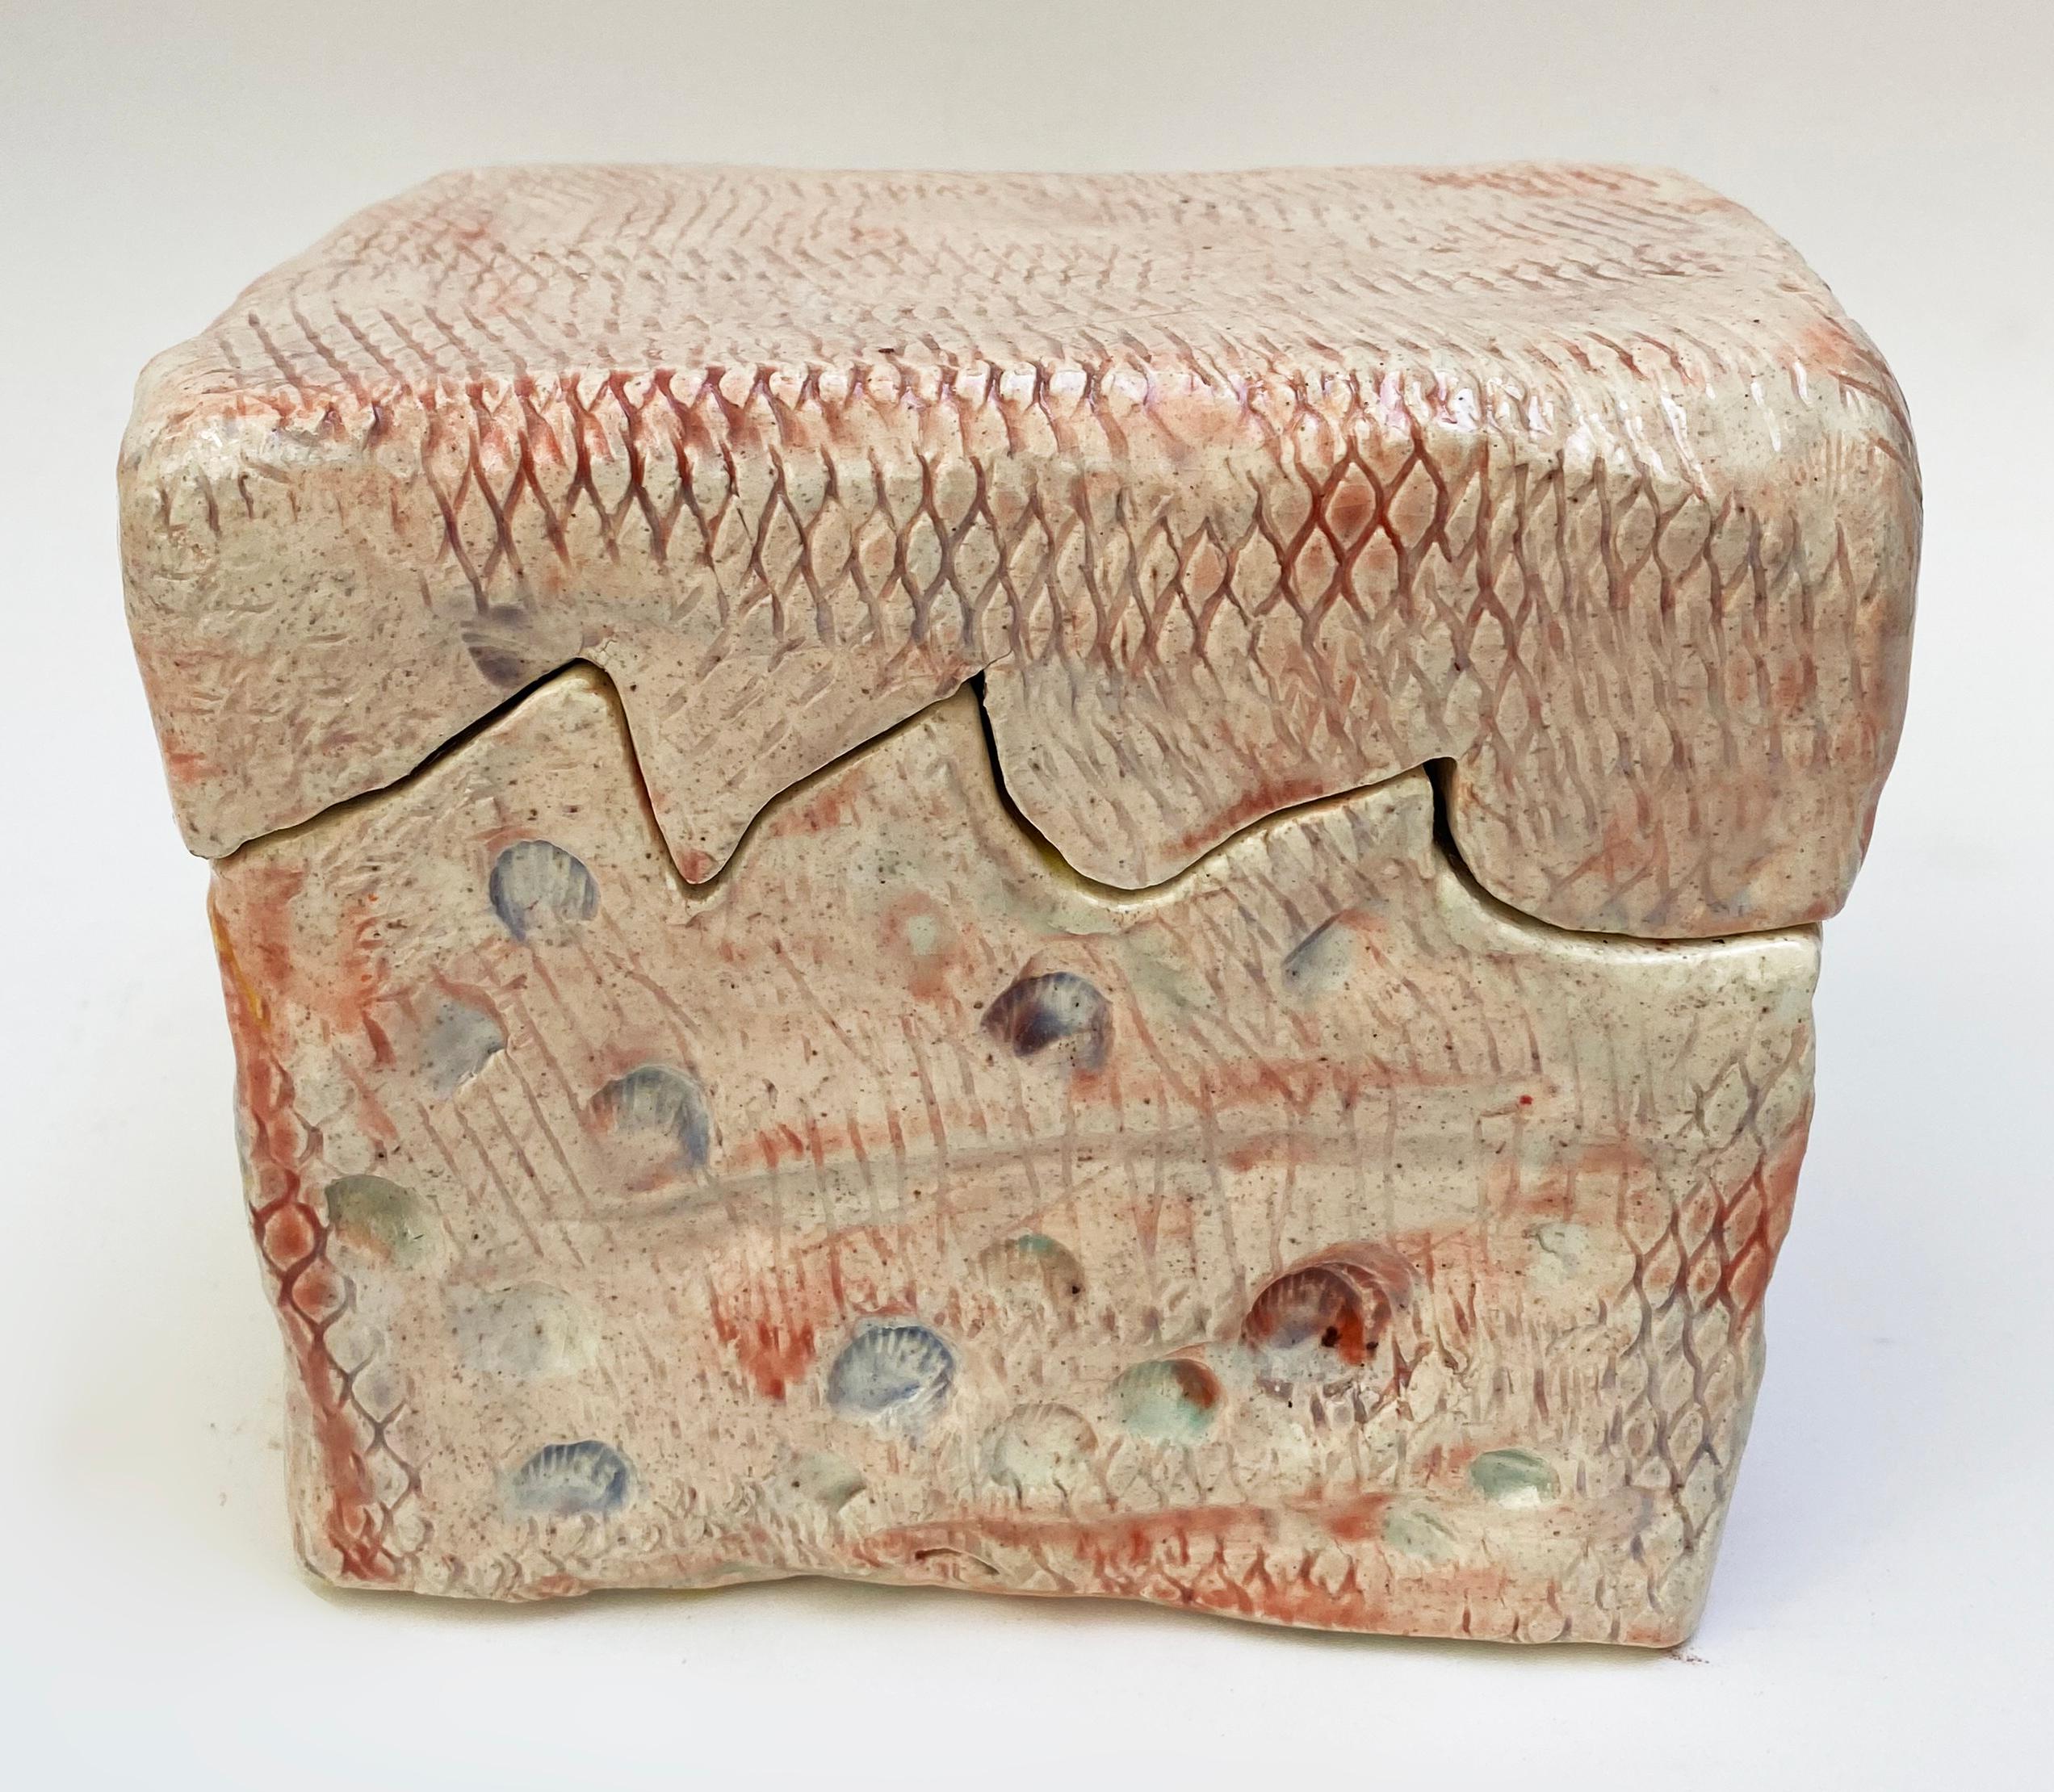 Hand Built Abstract Sculptural Glazed Ceramic Box. Fitted Lid

Offered for sale is a handmade abstract form ceramic box that is signed and dated by Rexx Fischer. The box is both functional and a sculptural object. Rexx is a painter and ceramicist.